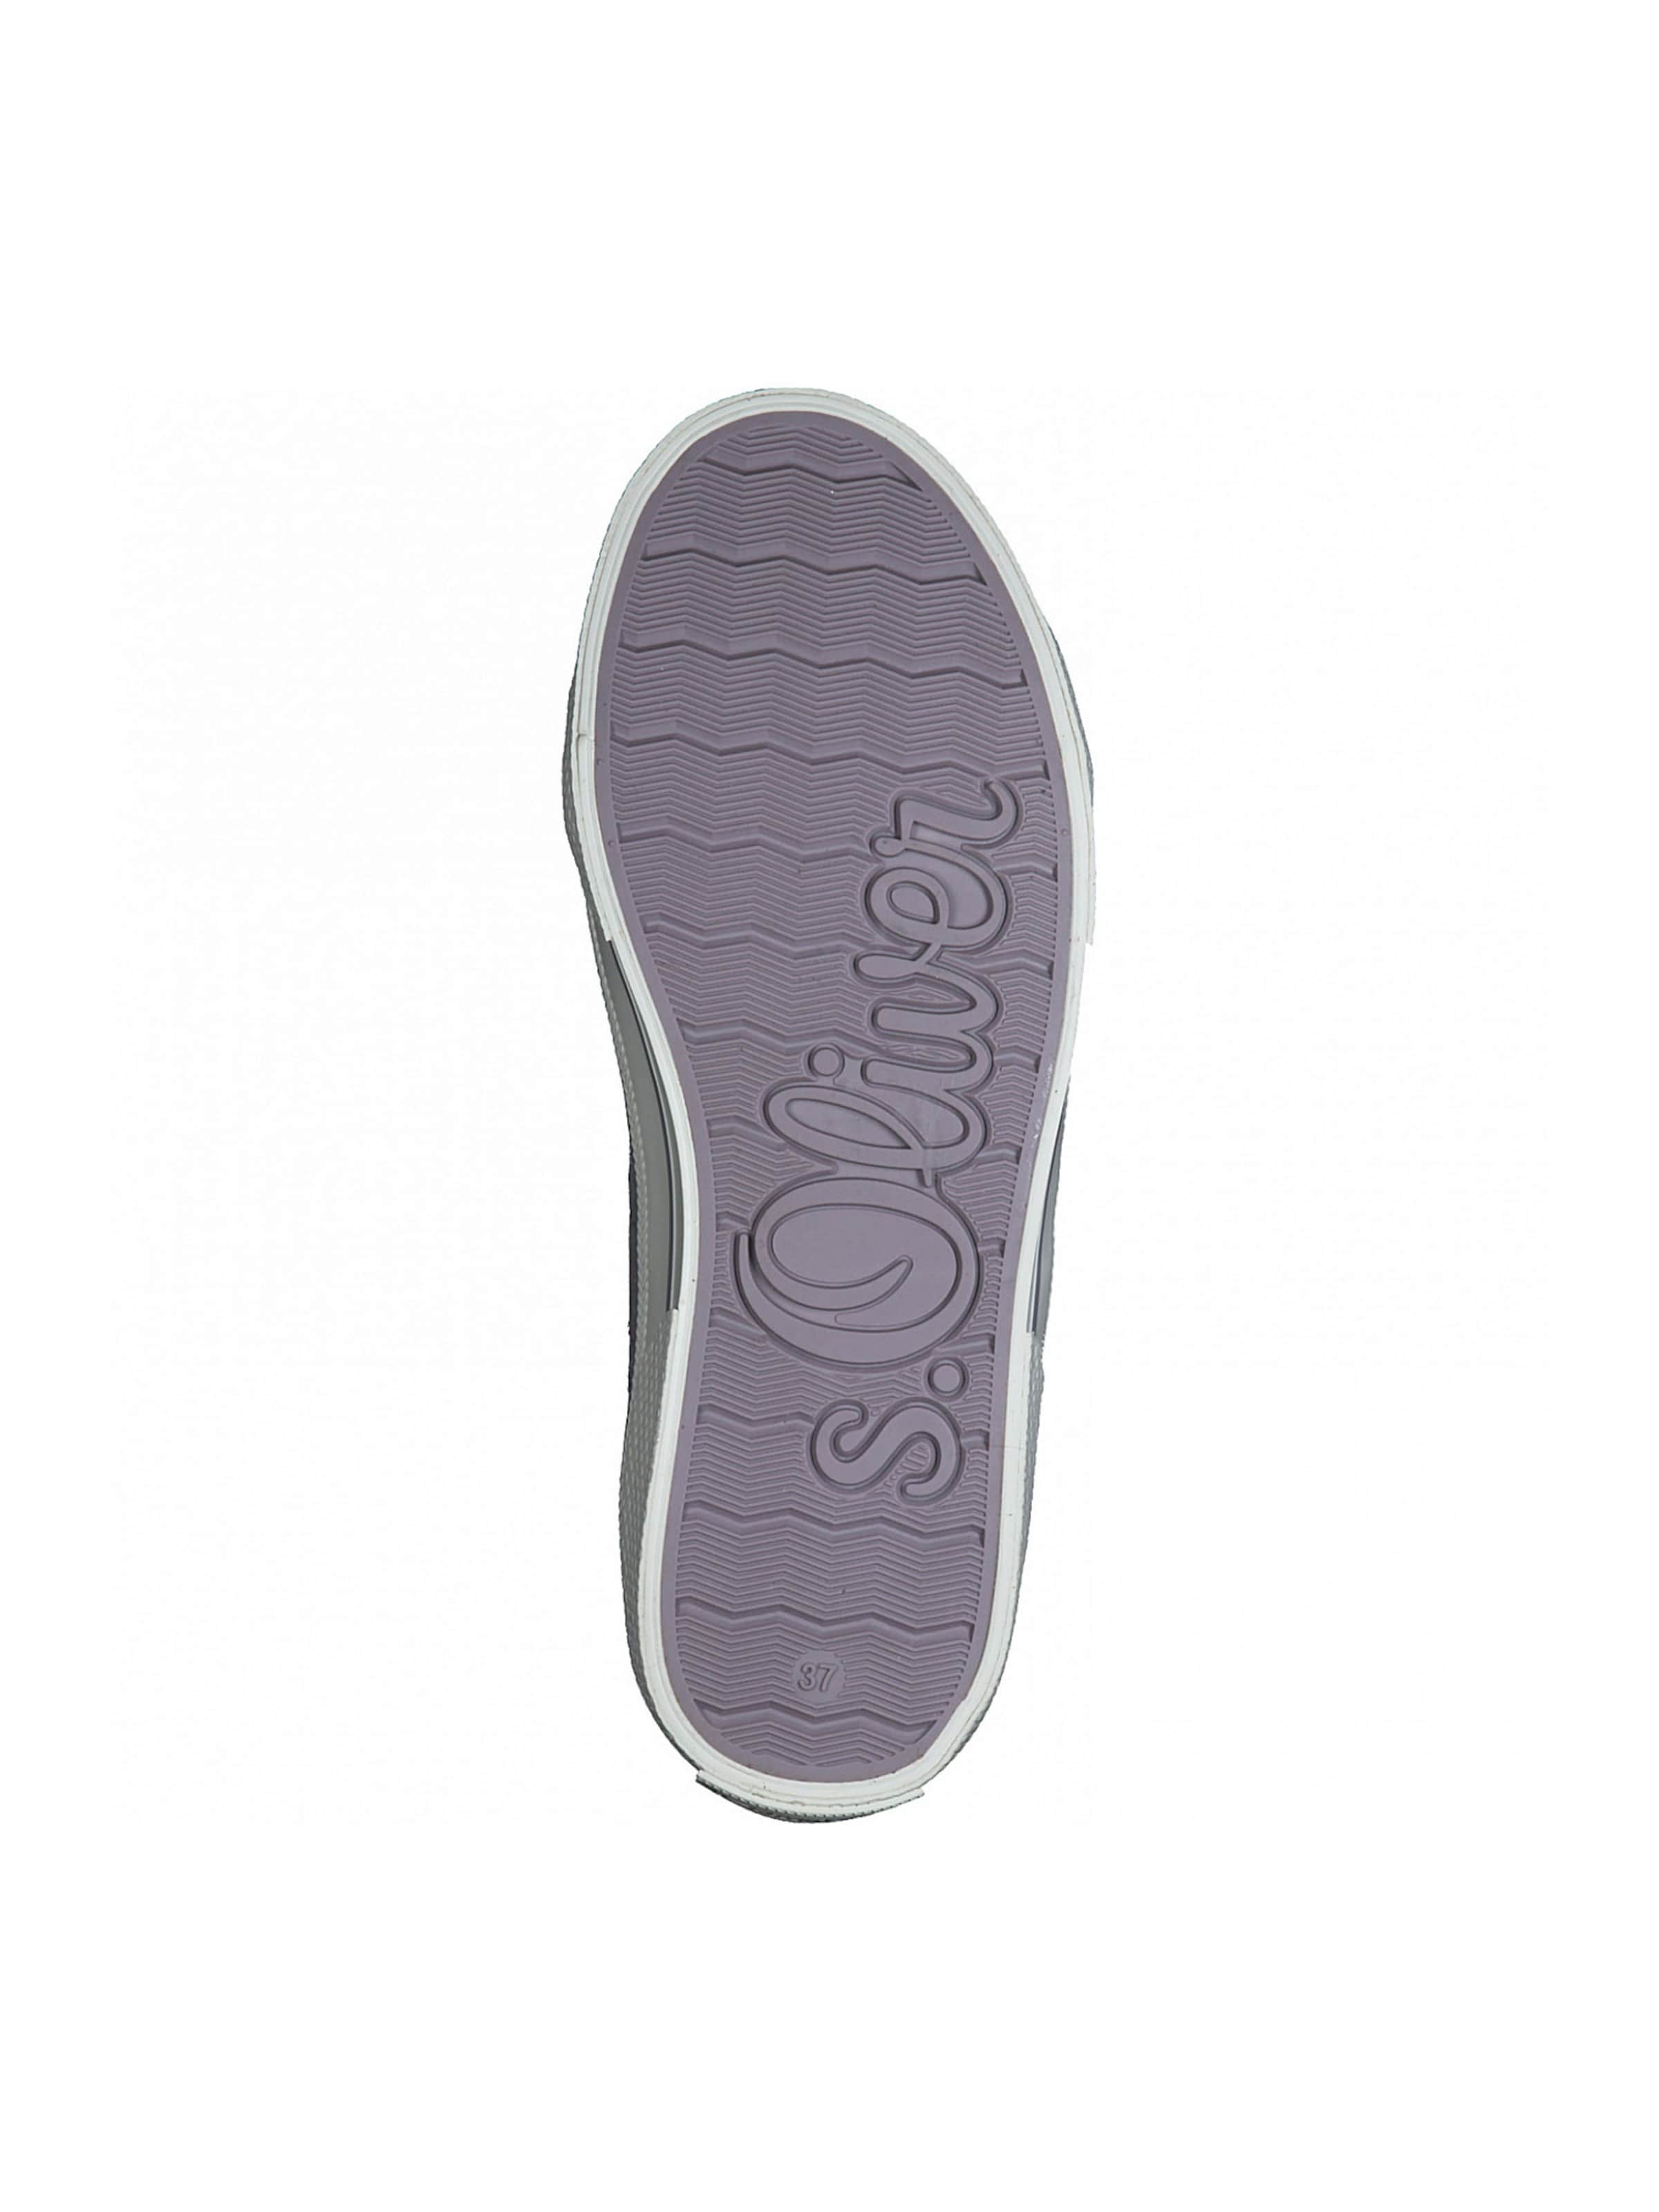 Chaussures Slip on s.Oliver en Lilas 